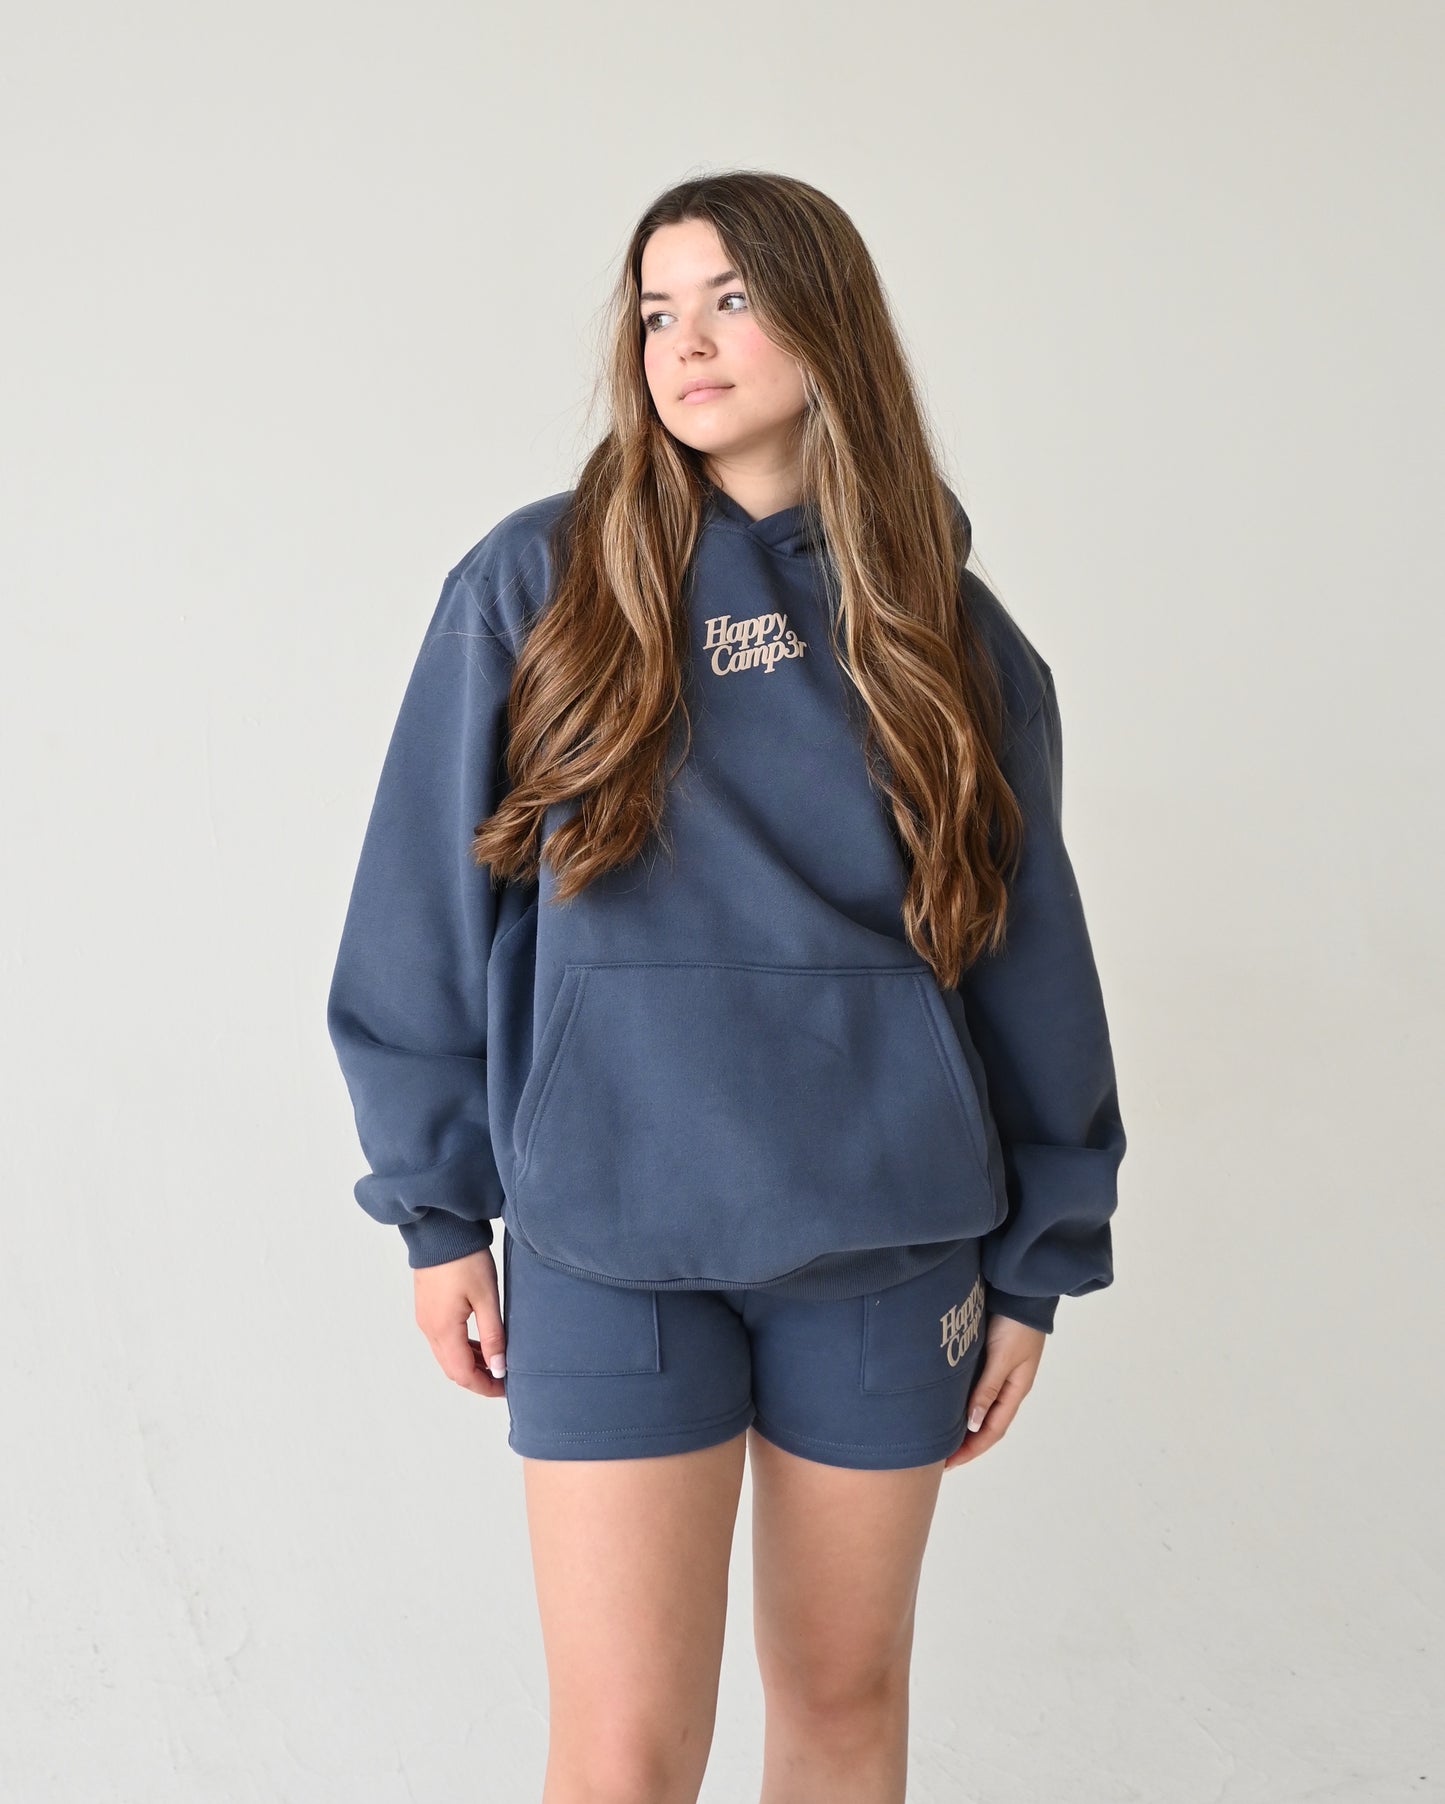 Disrupt Anxiety with Gratitude Hoodie - Midnight Blue